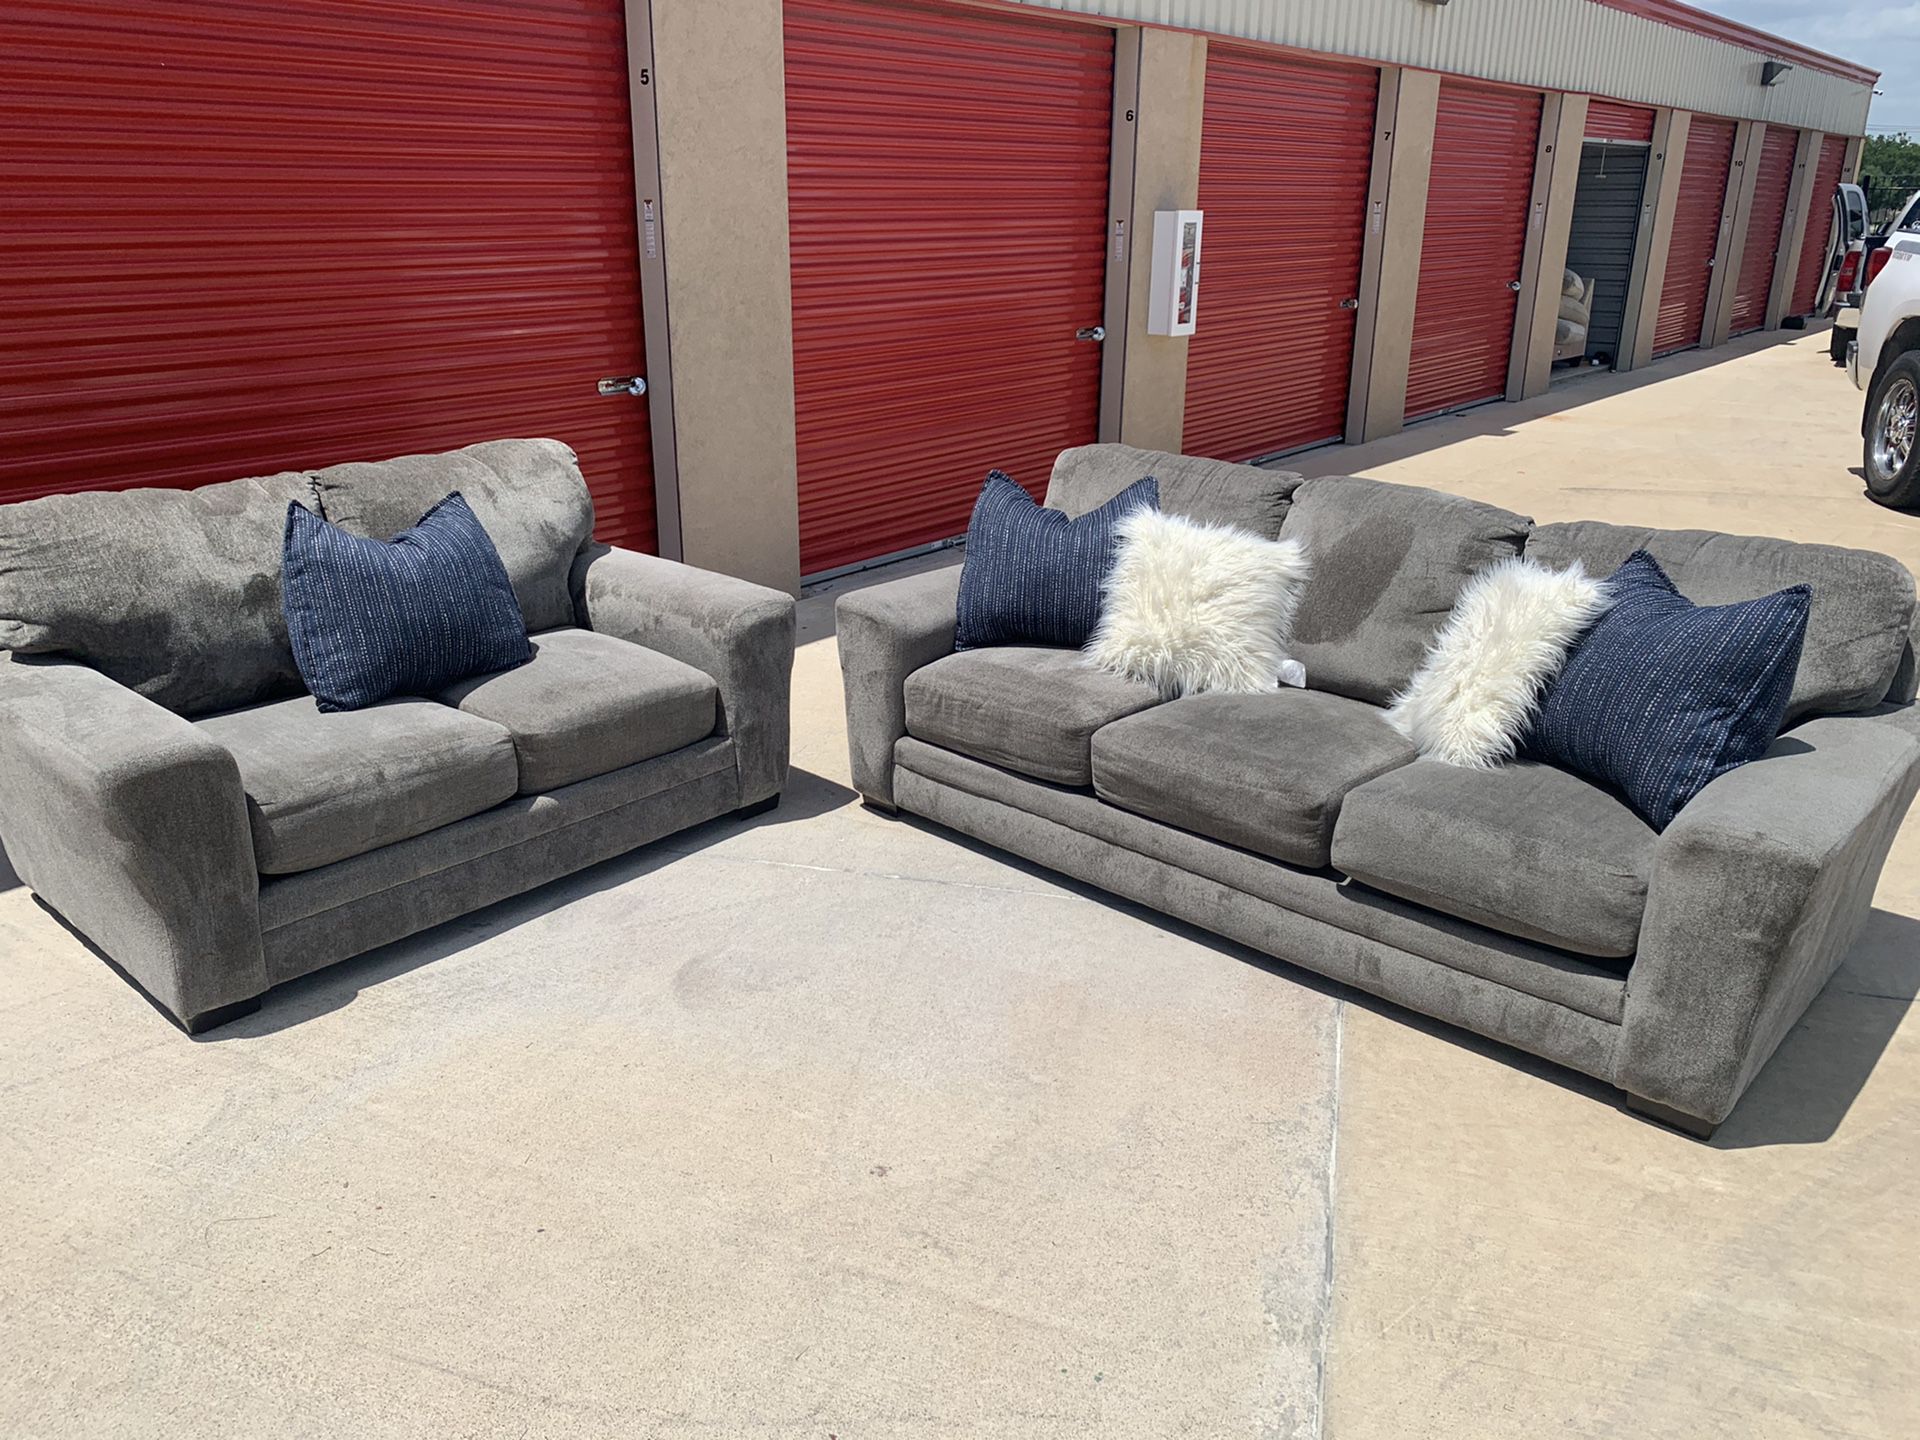 Can deliver - grey couch sofa loveseat 2pcs